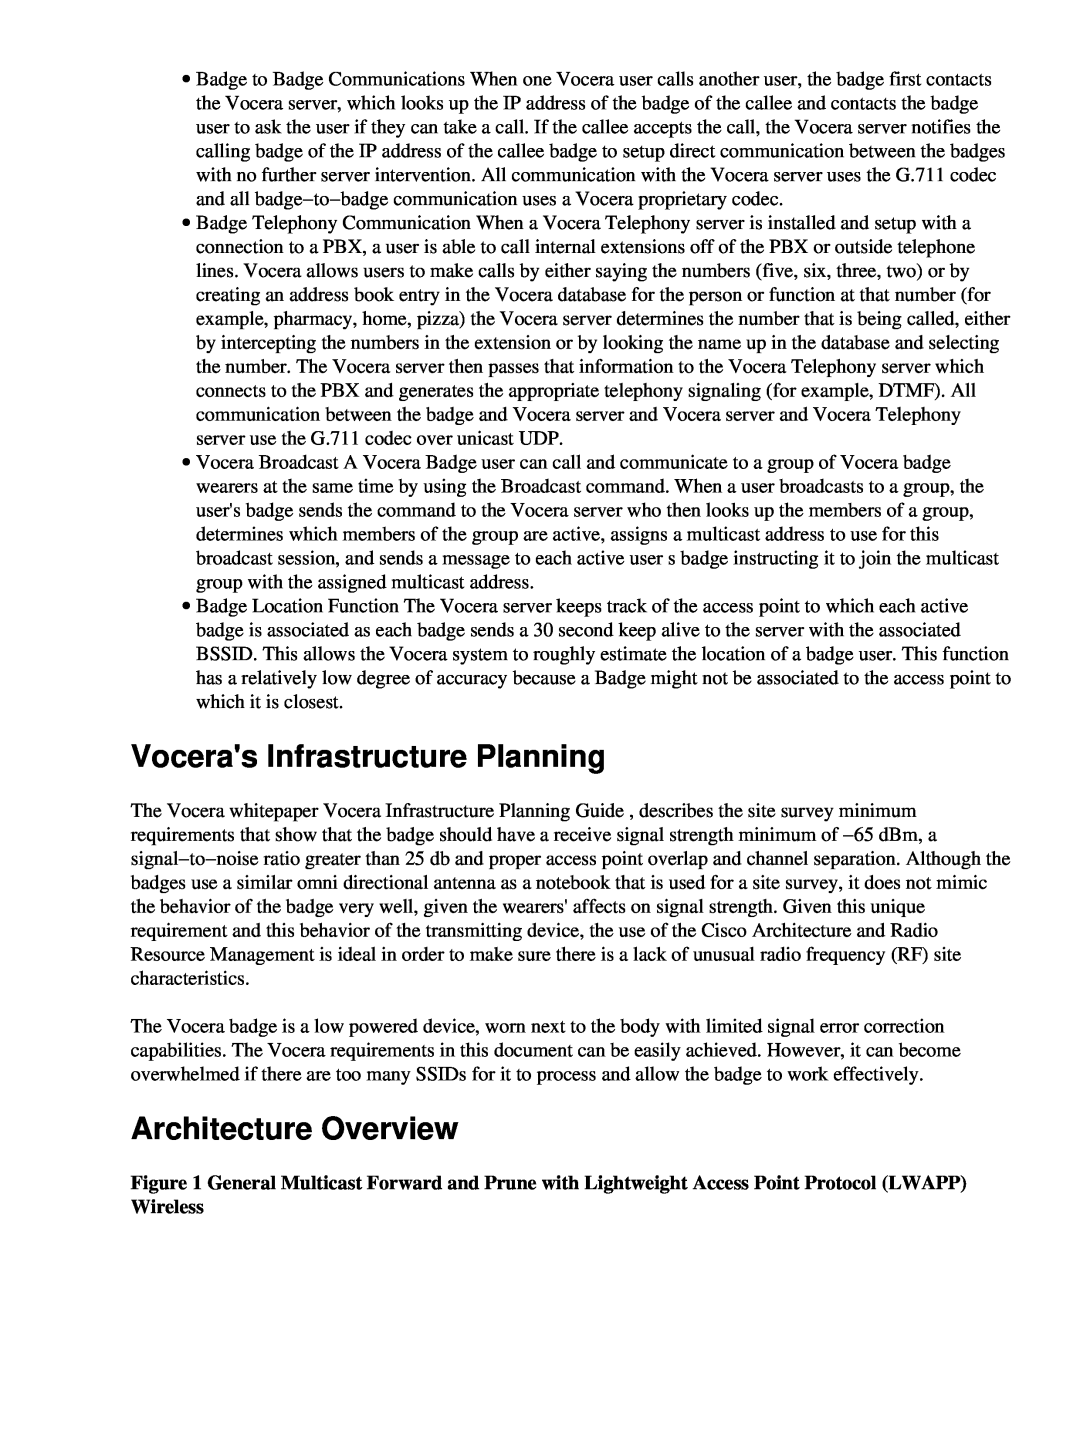 Cisco Systems 71642 manual Voceras Infrastructure Planning, Architecture Overview 